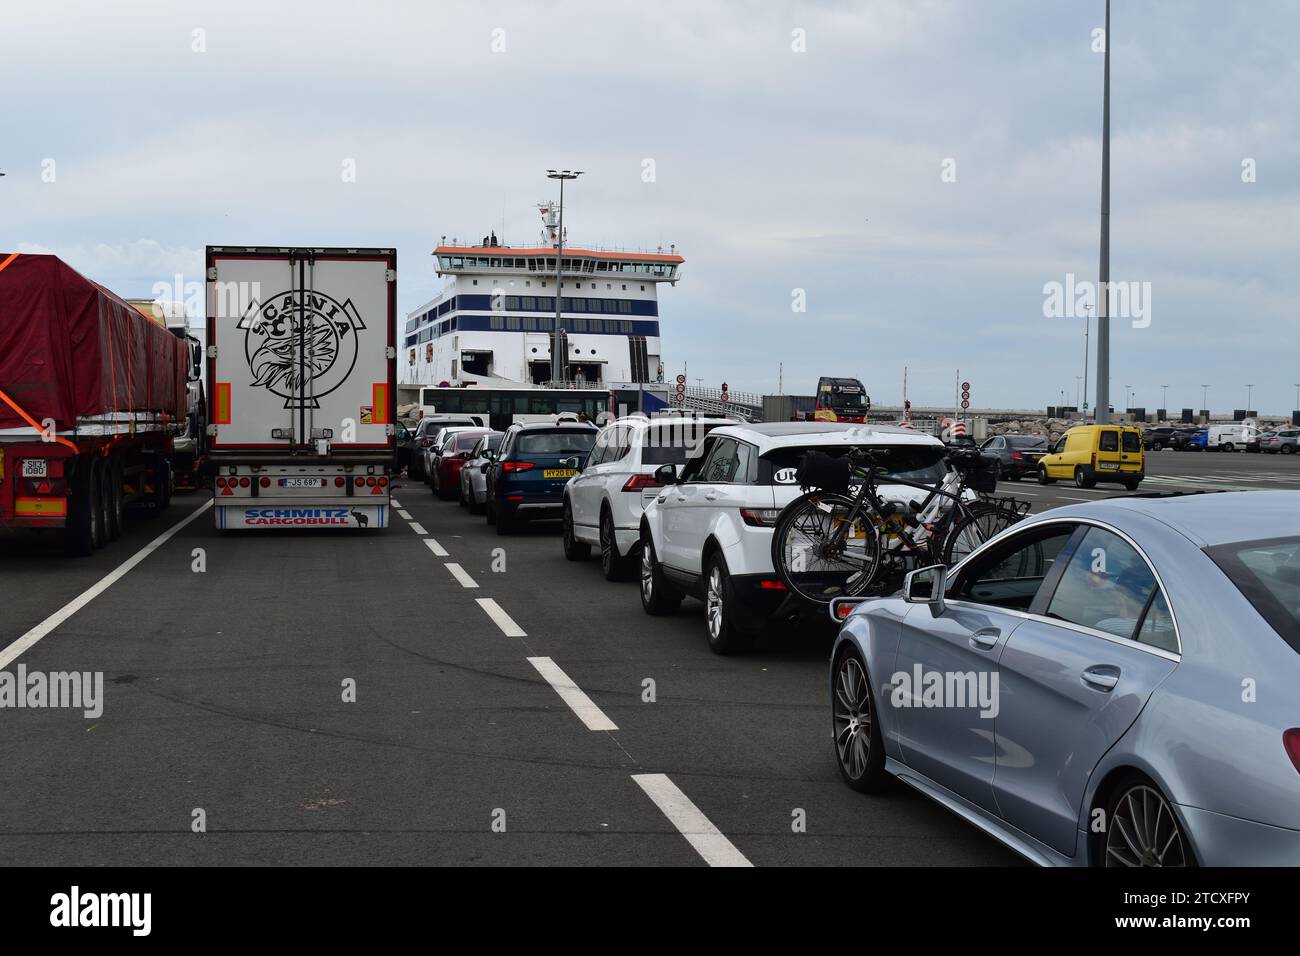 Cars and trucks waiting in line to board the ferry boat at Calais car ferry port Stock Photo